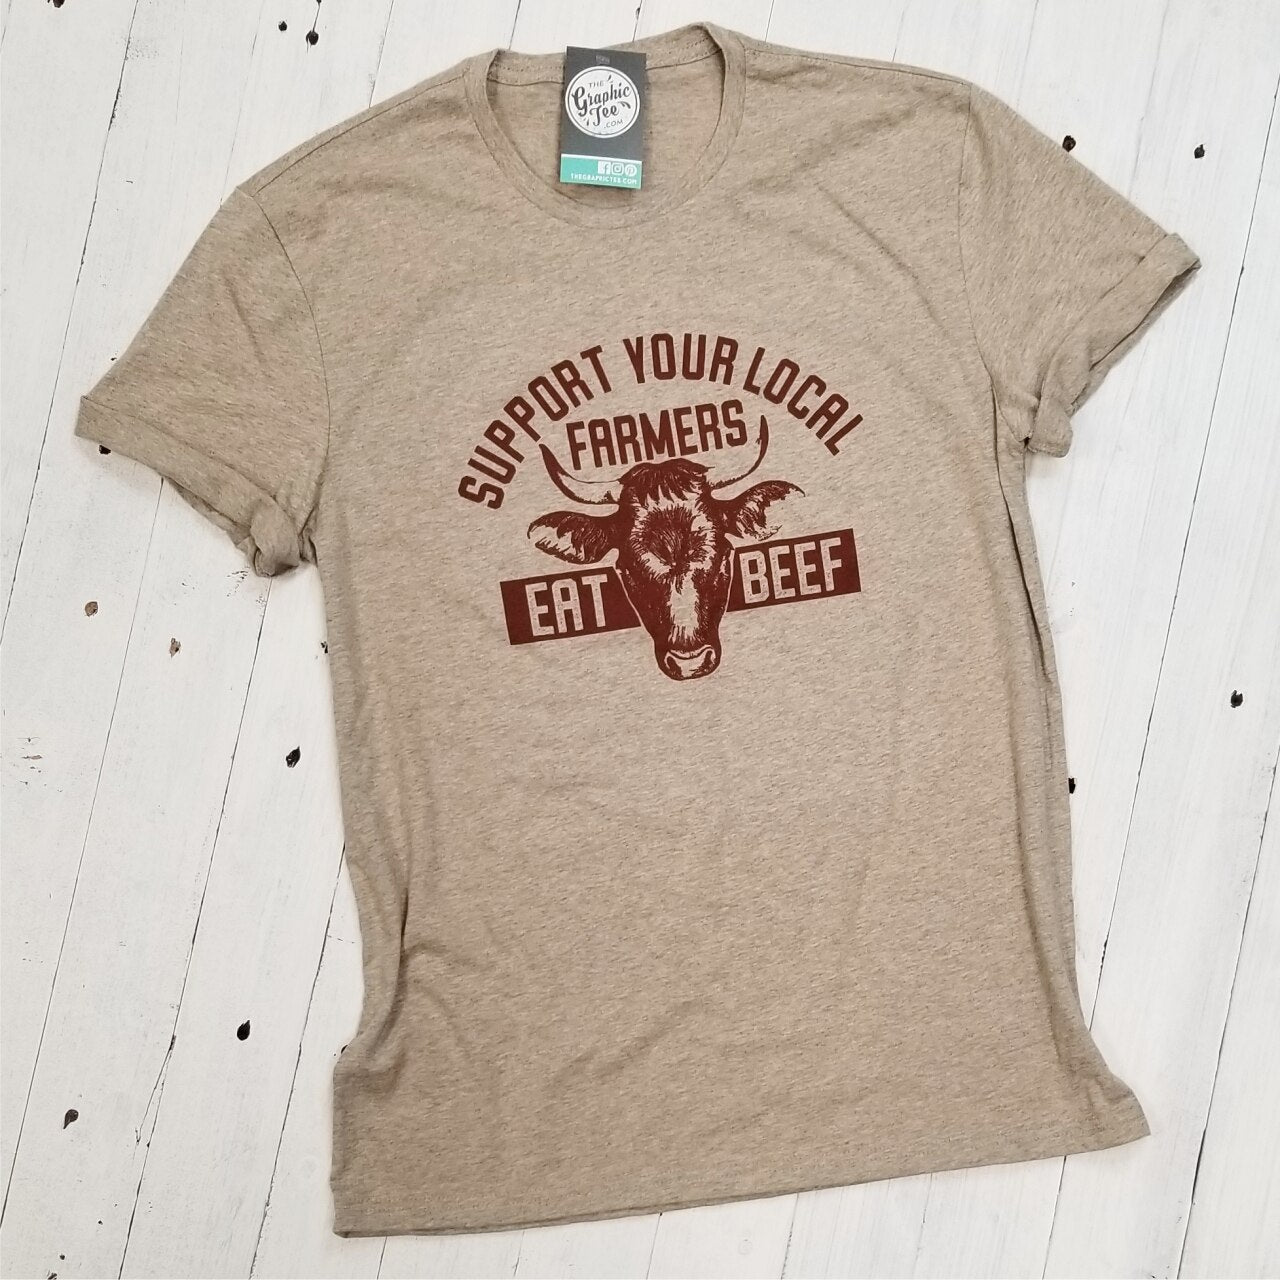 *WHOLESALE* Support Your Local Farmers - Adult Tee - The Graphic Tee